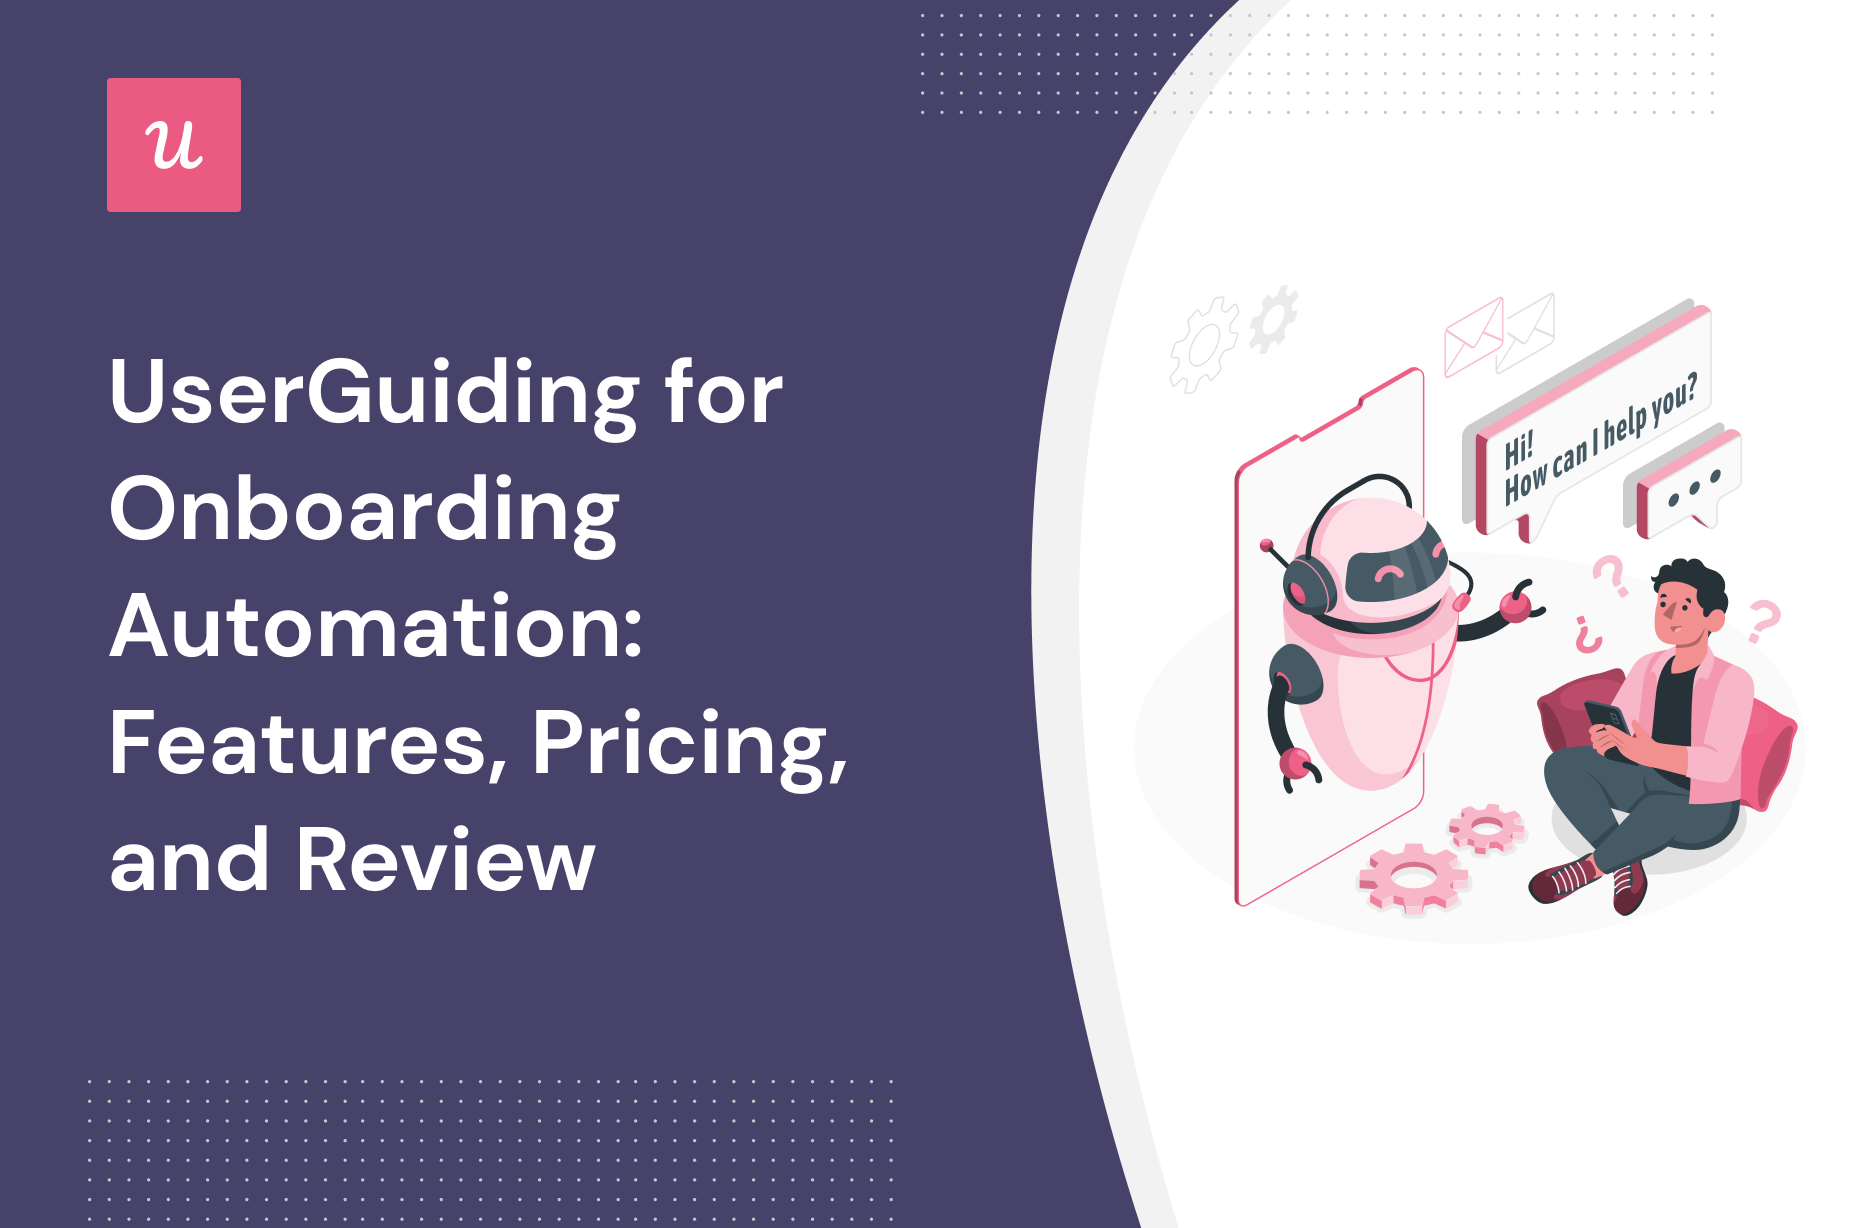 UserGuiding for onboarding automation: Features, Pricing, and Review